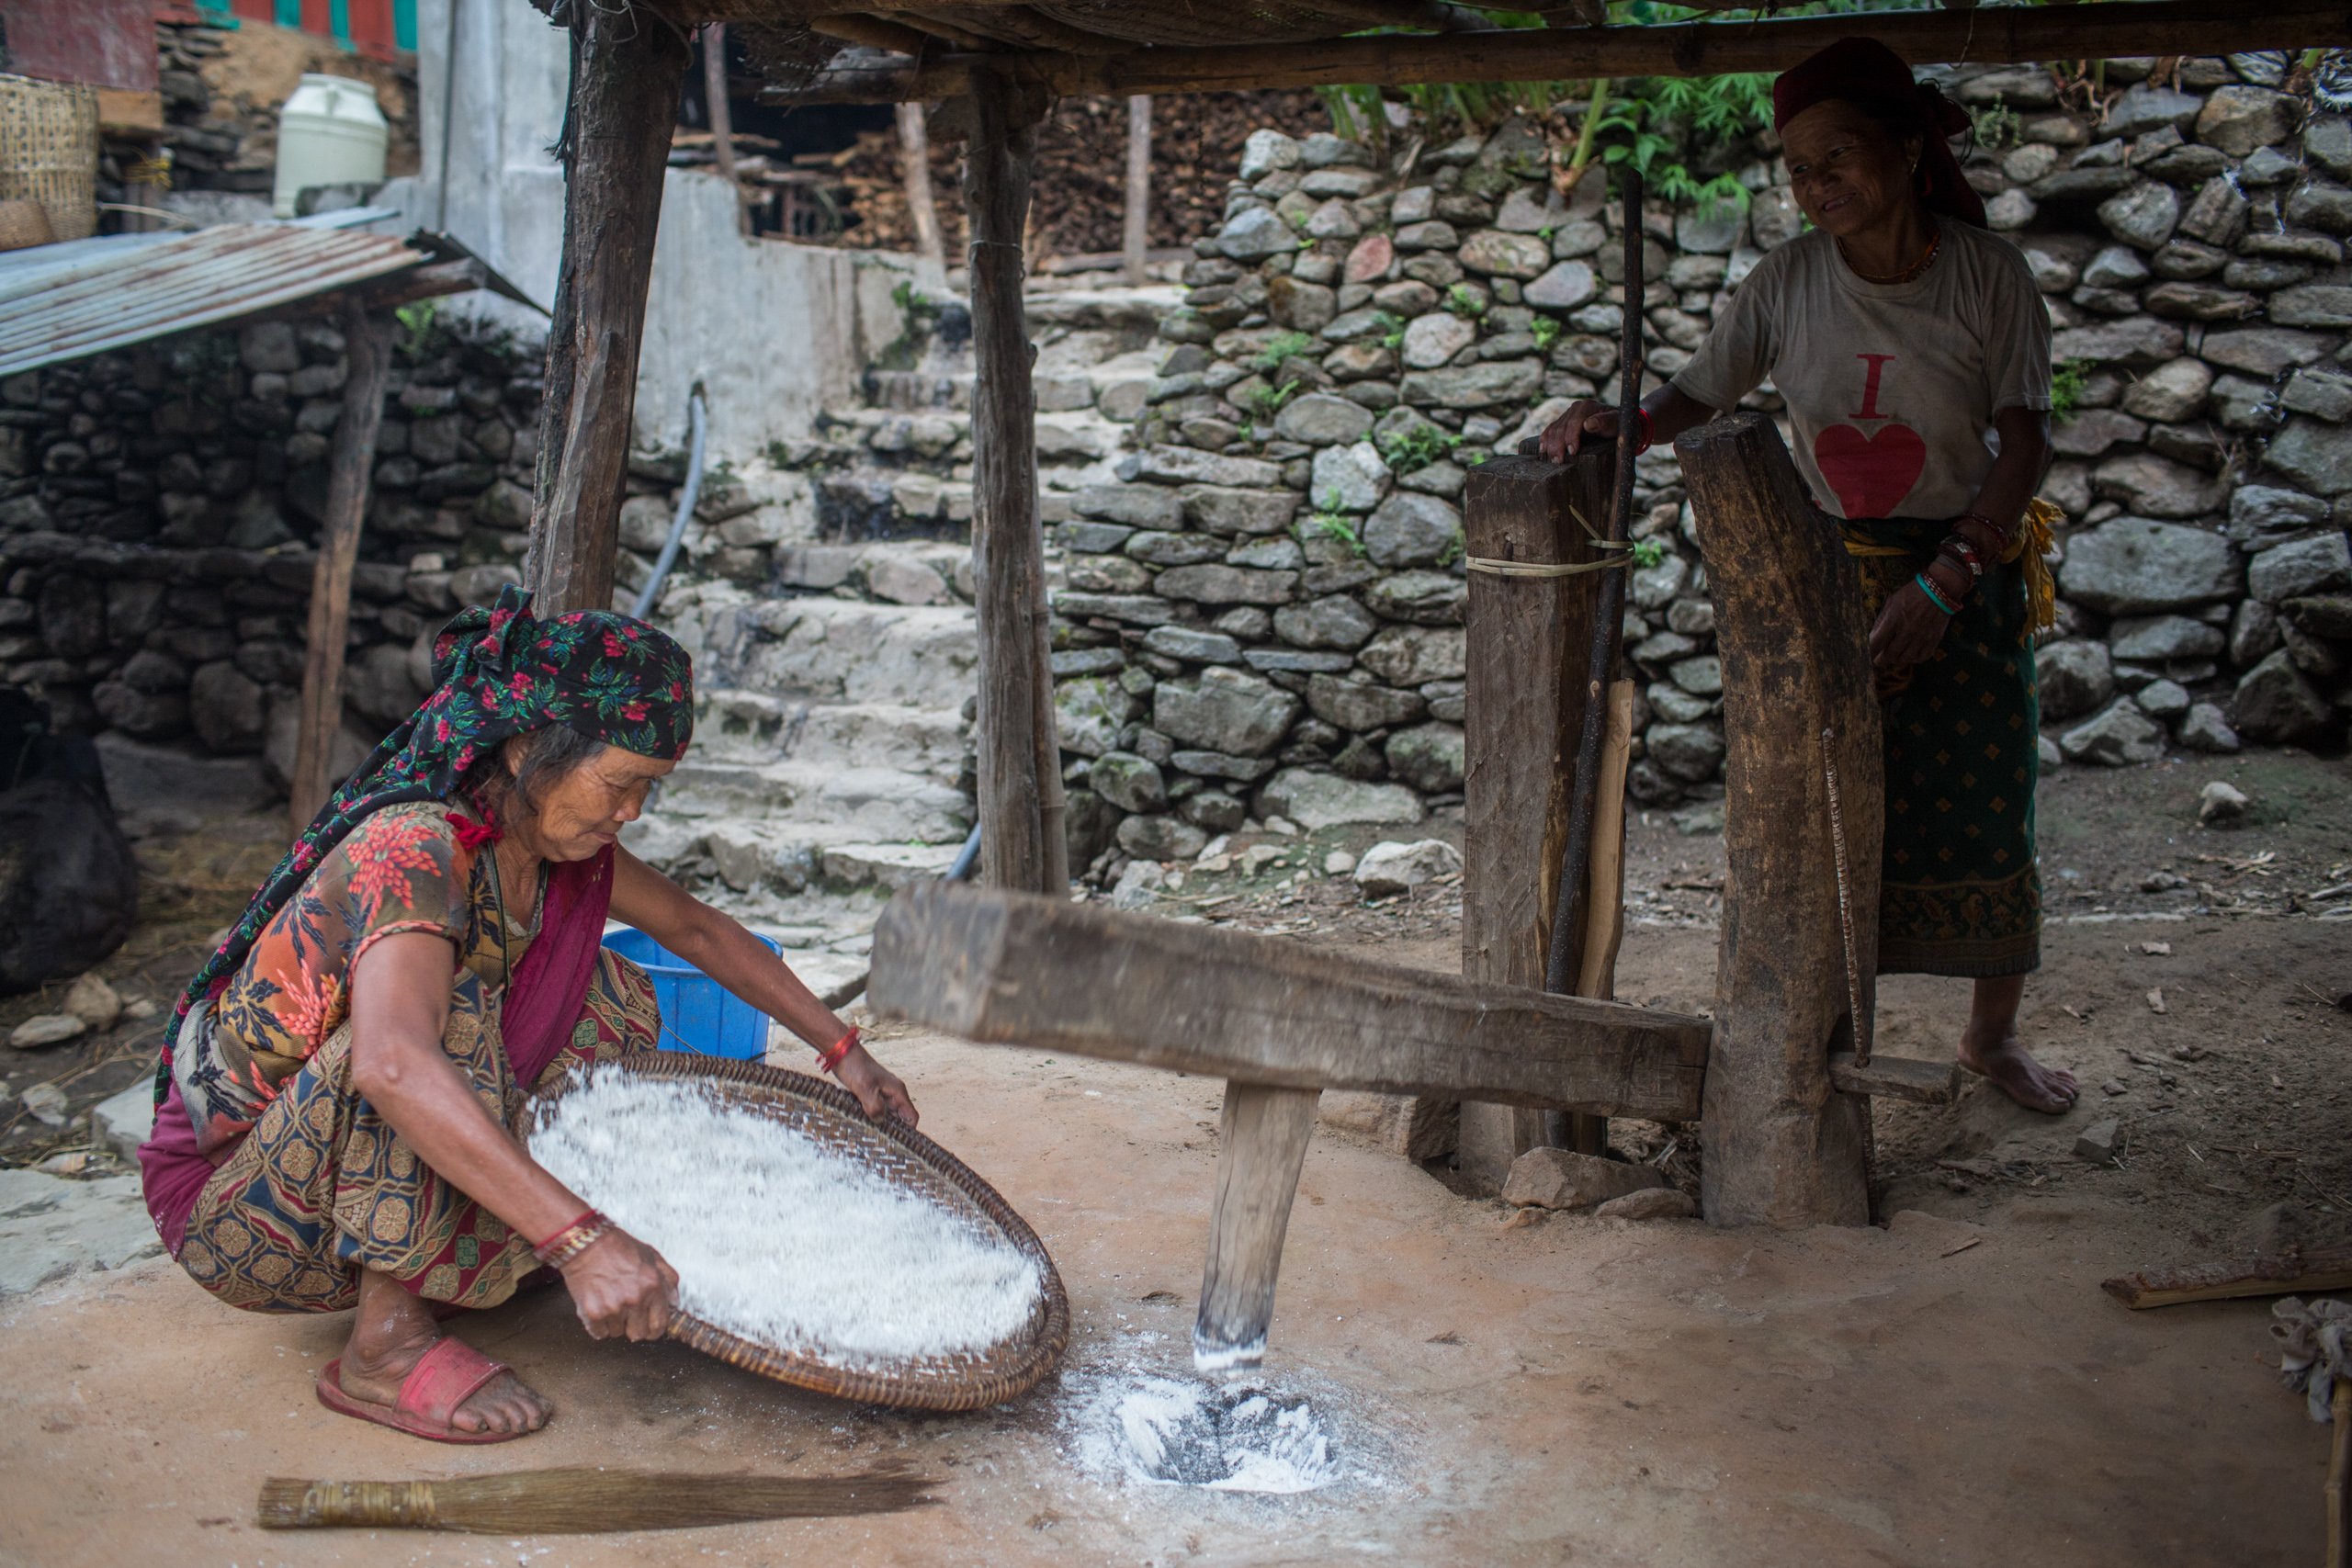 Gurung women in Naiche grind rice in a dhiki, a traditional manual grinder. Women tend not to be involved in honey hunting as they are busy with household work.